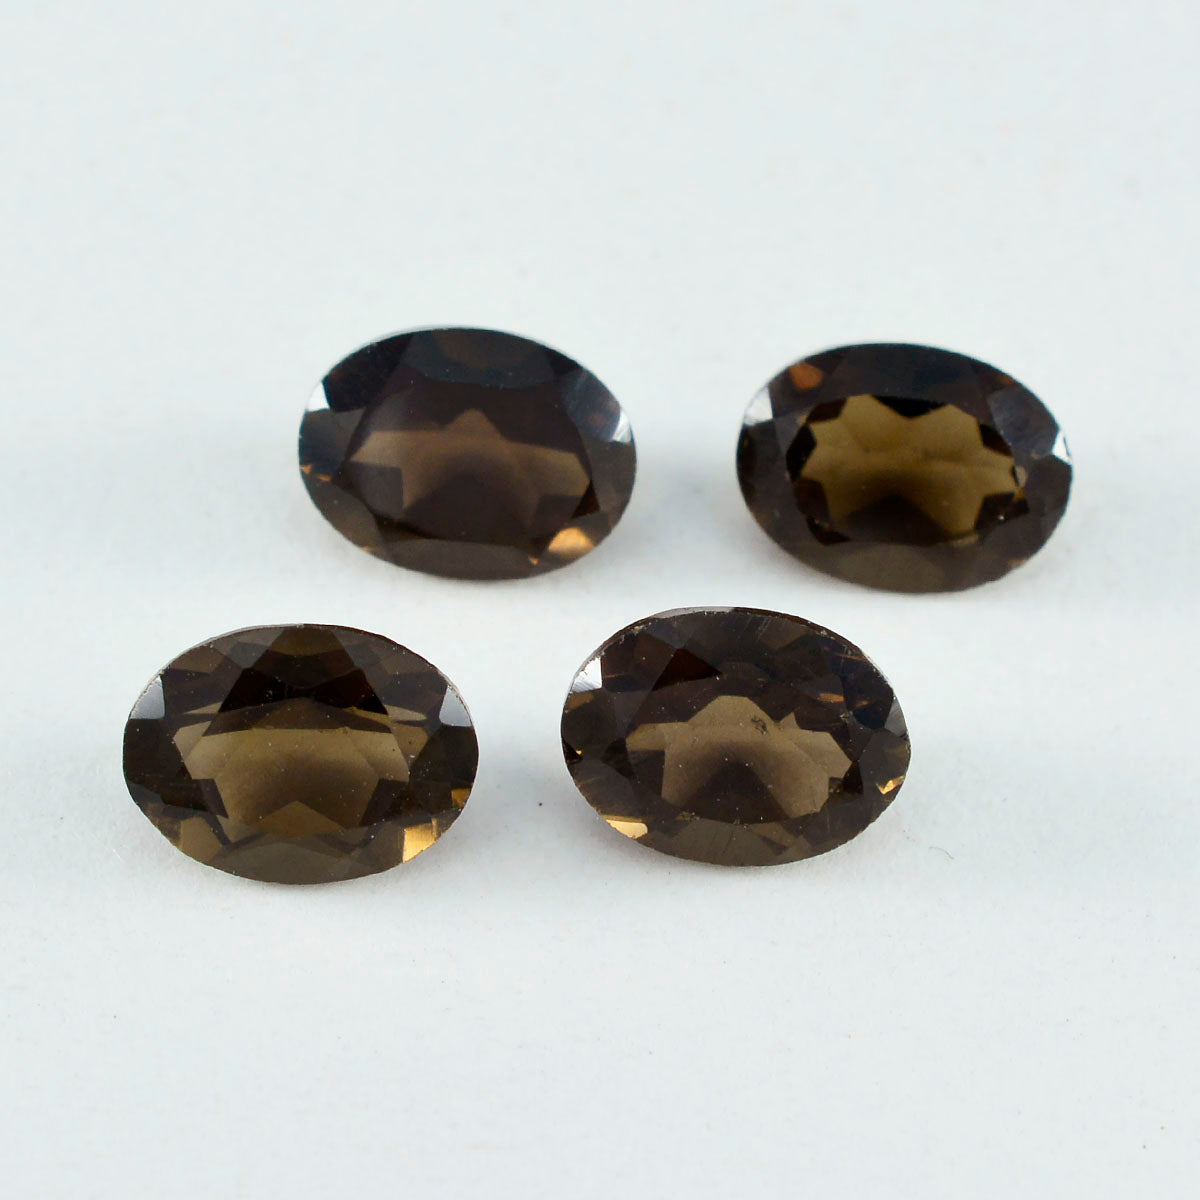 Riyogems 1PC Genuine Brown Smoky Quartz Faceted 9x11 mm Oval Shape great Quality Loose Stone